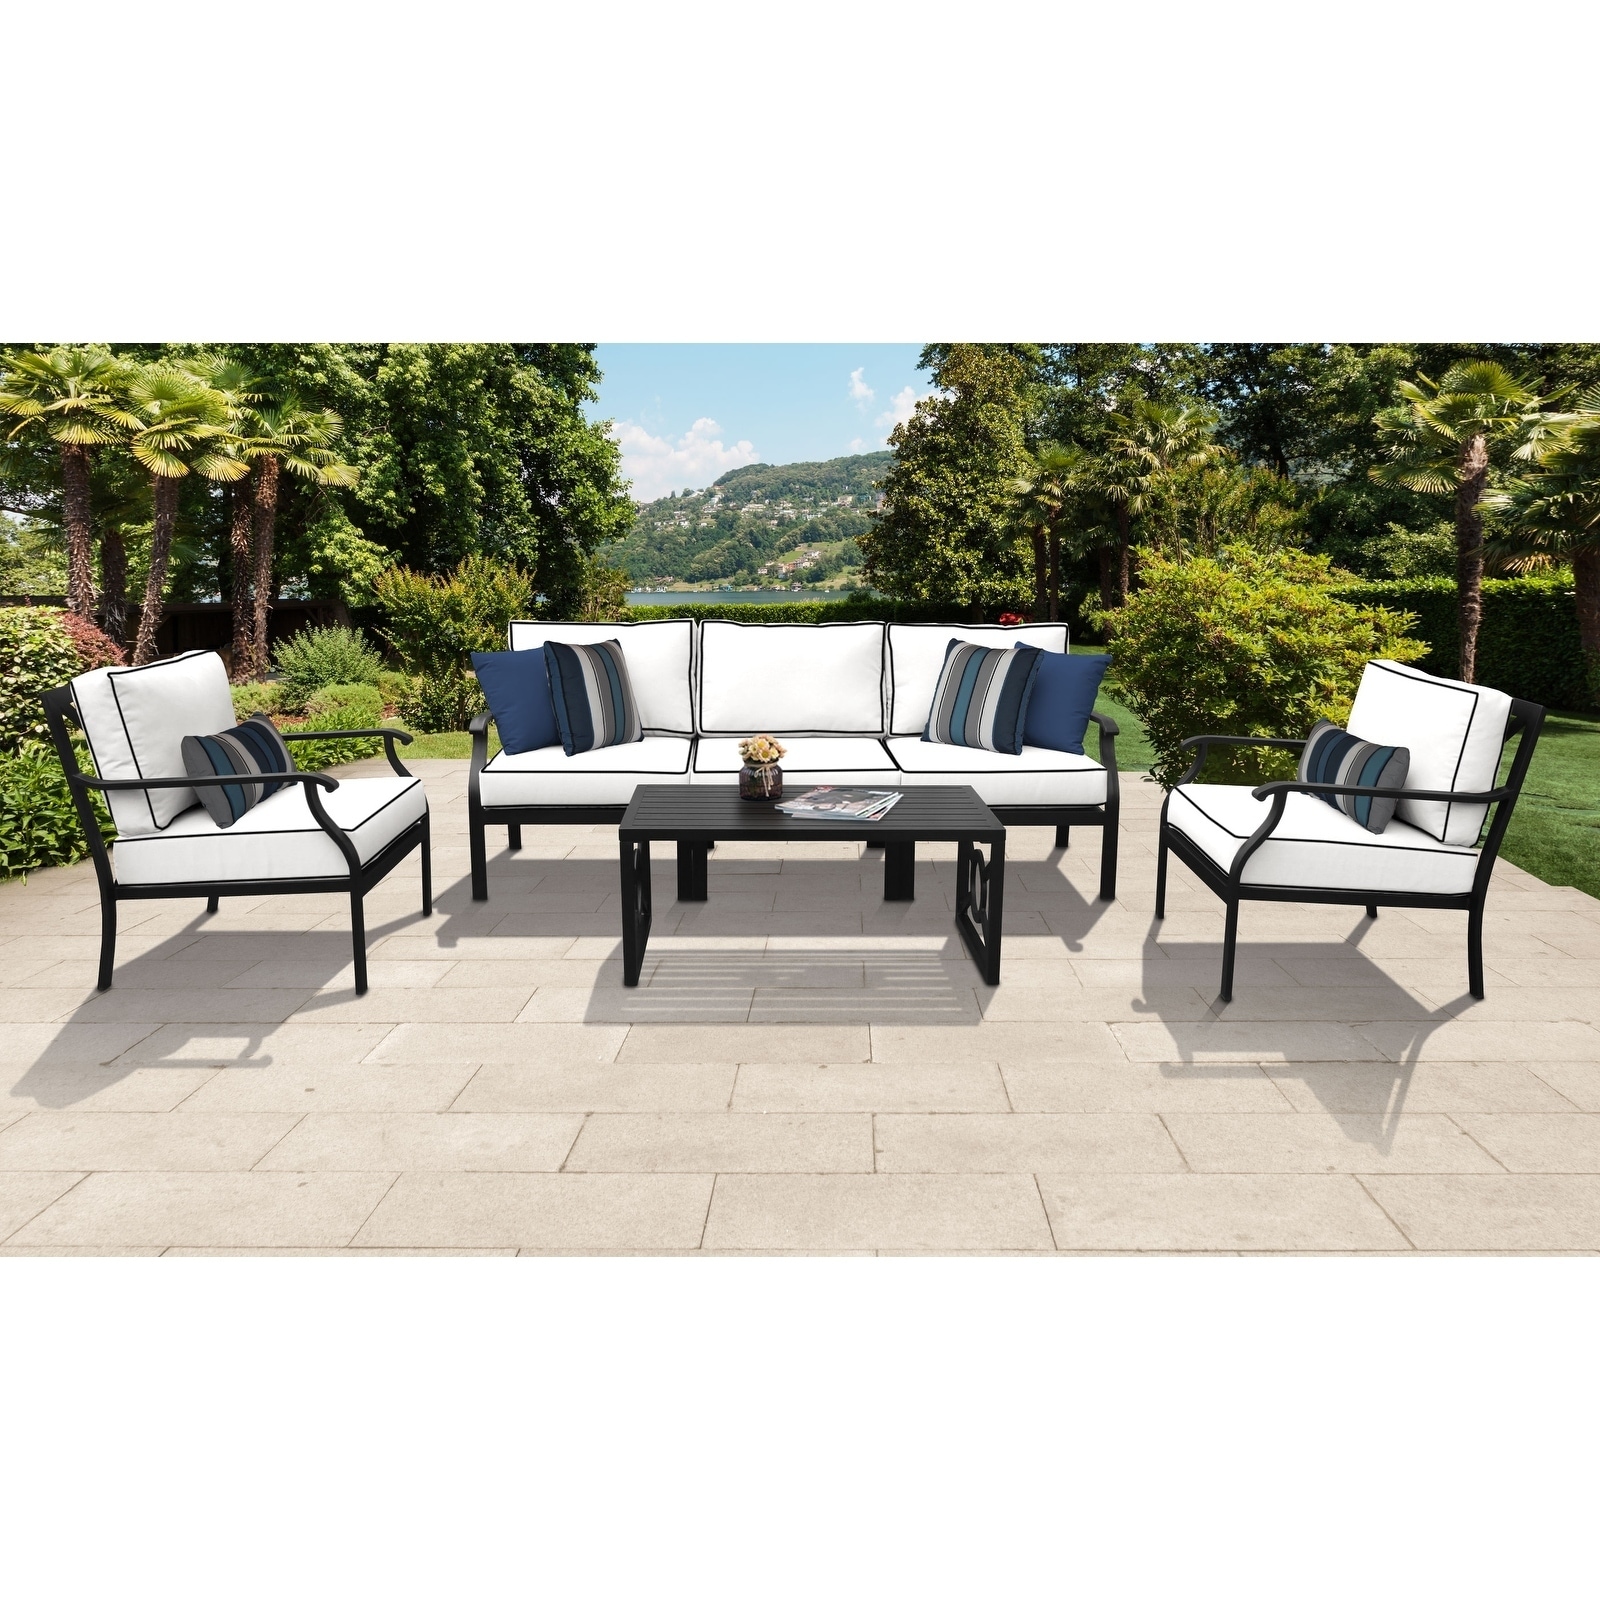 Kathy Ireland Homes And Gardens Madison Ave. 6-piece Patio Furniture Set